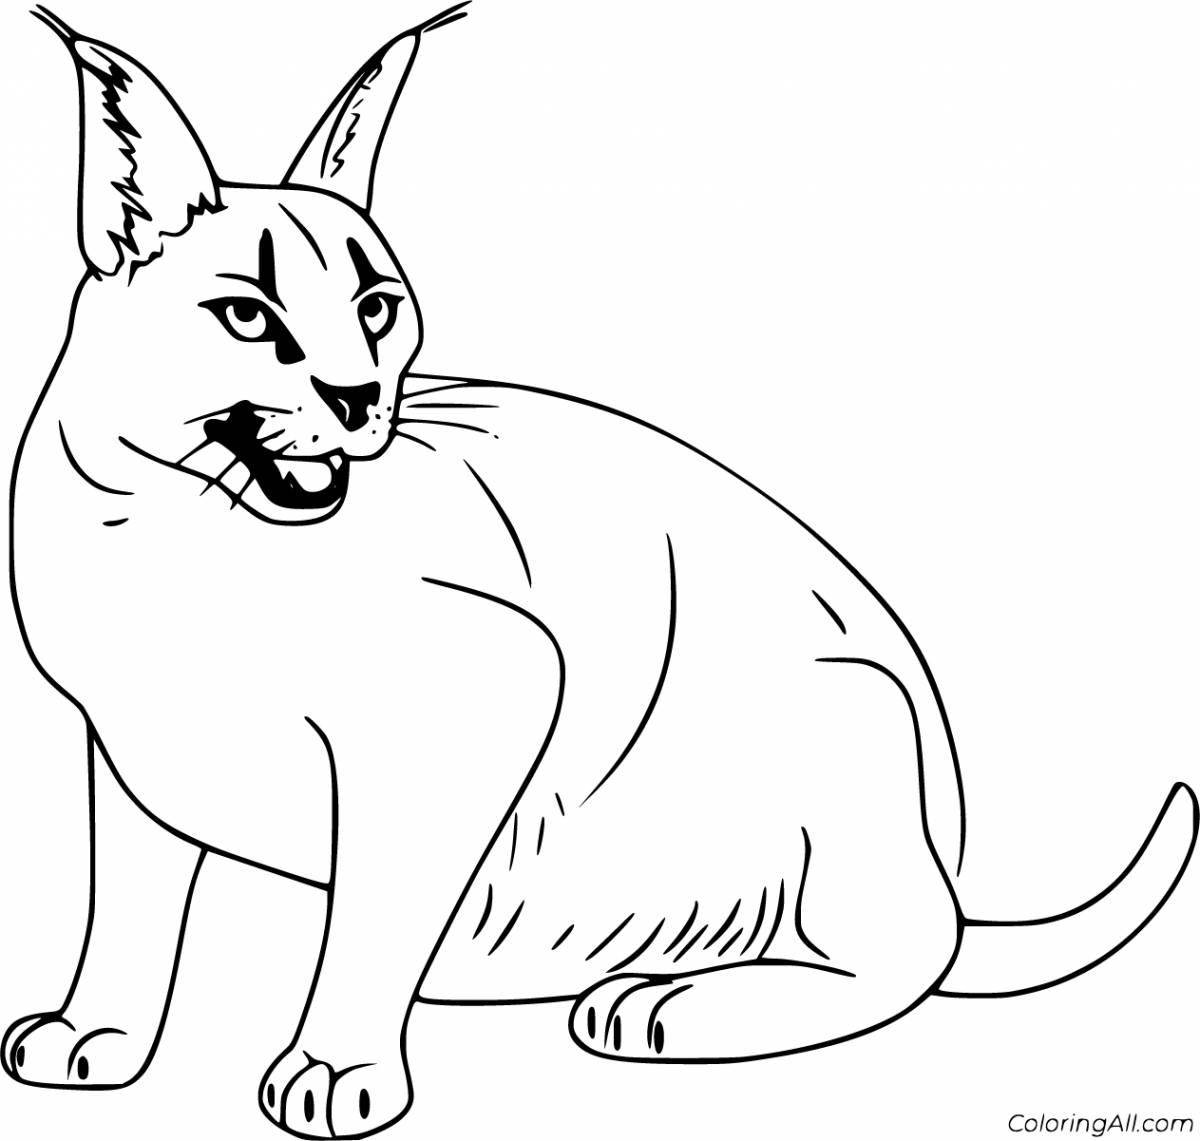 Witty caracal coloring page